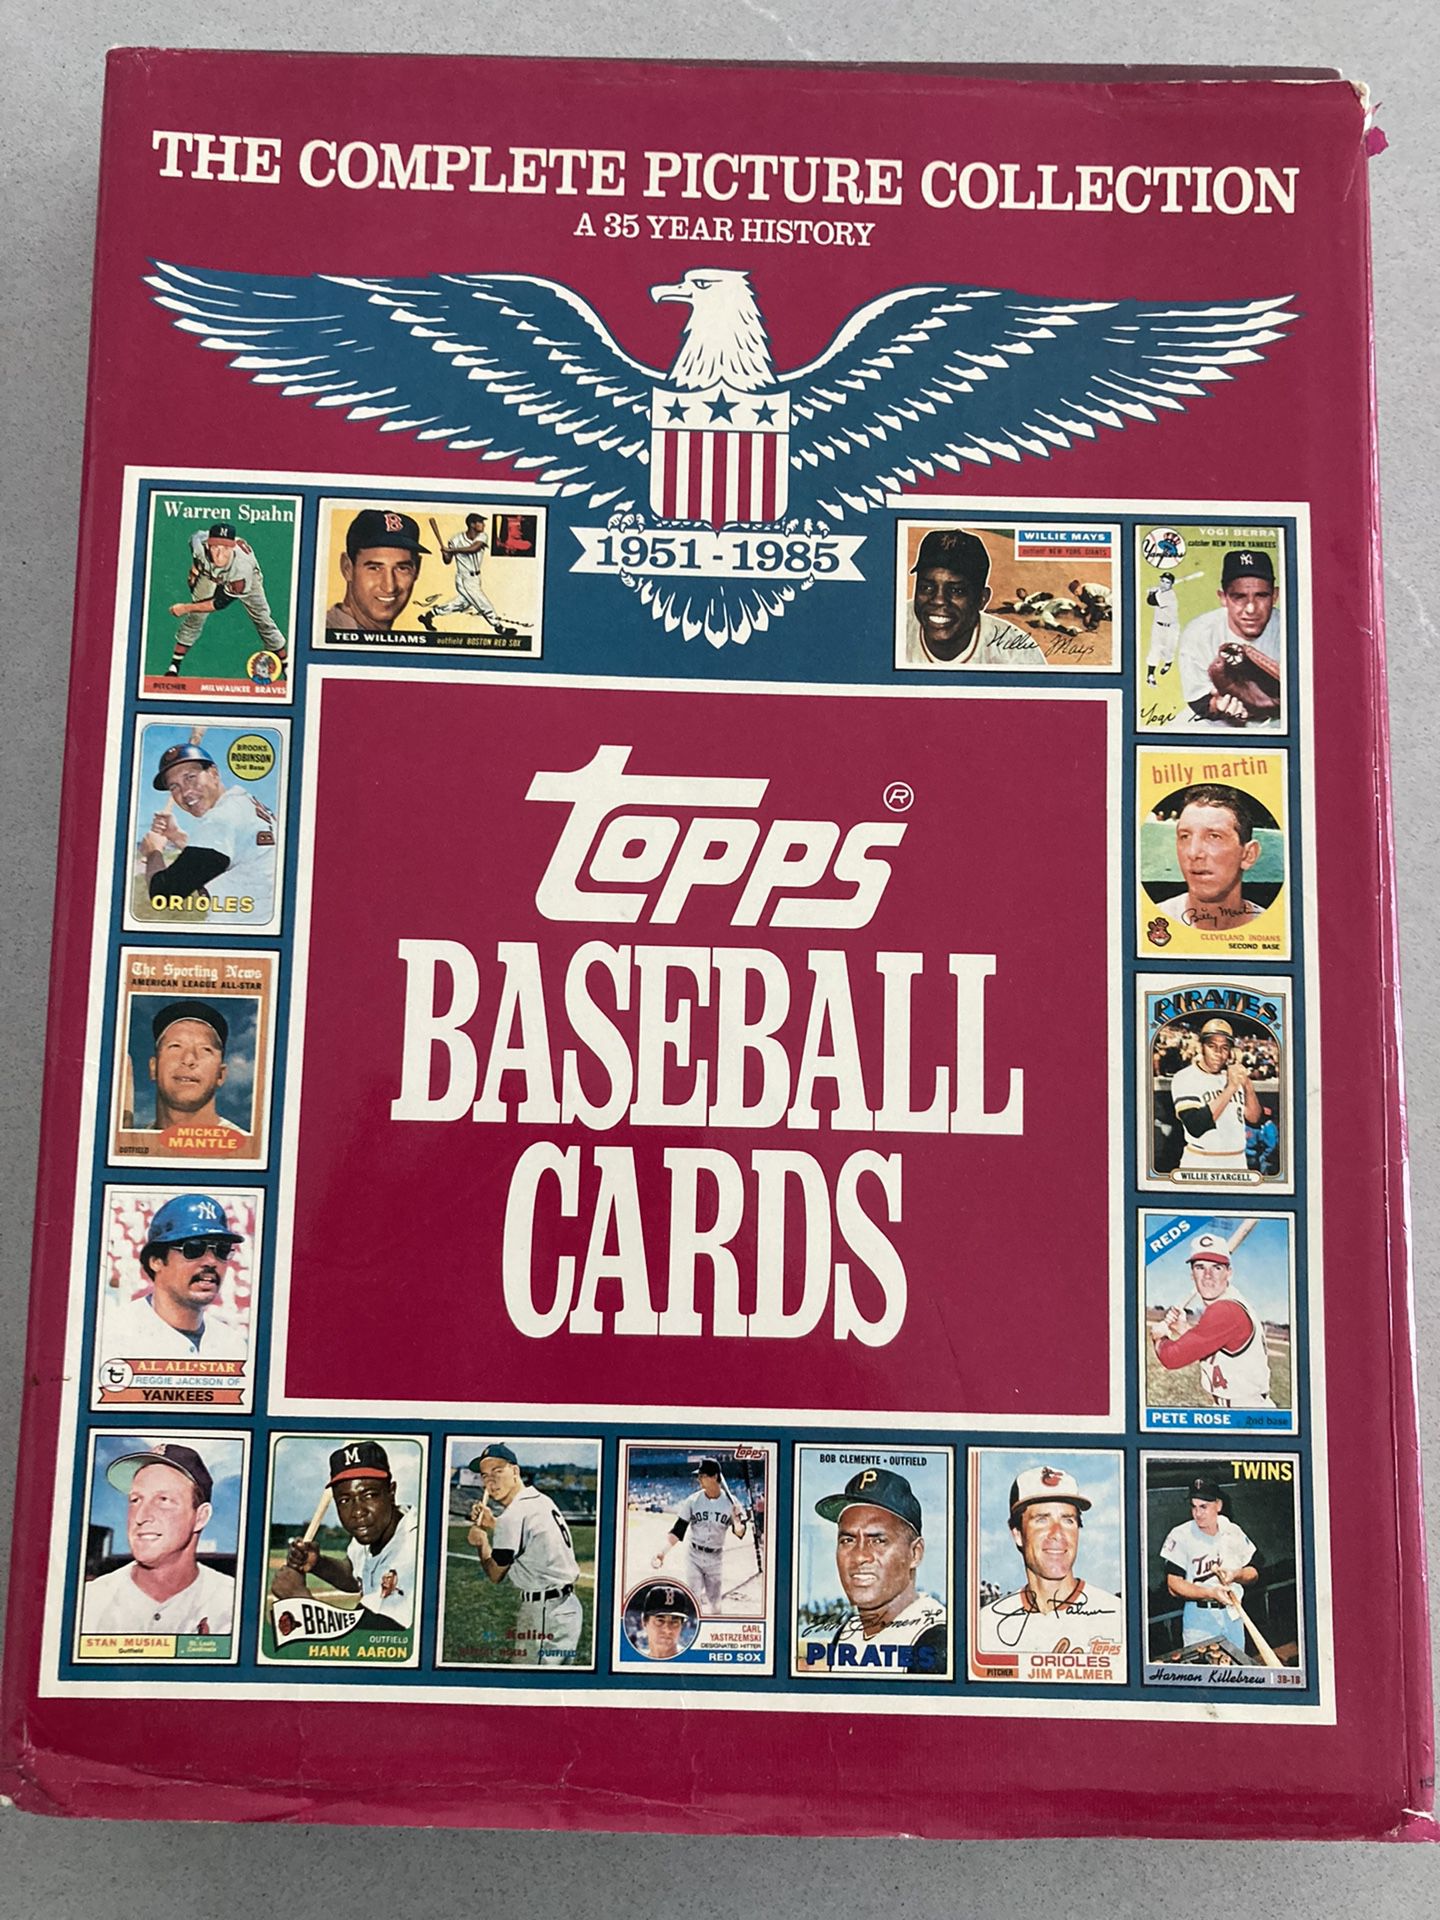 Topps Baseball Cards 1(contact info removed)